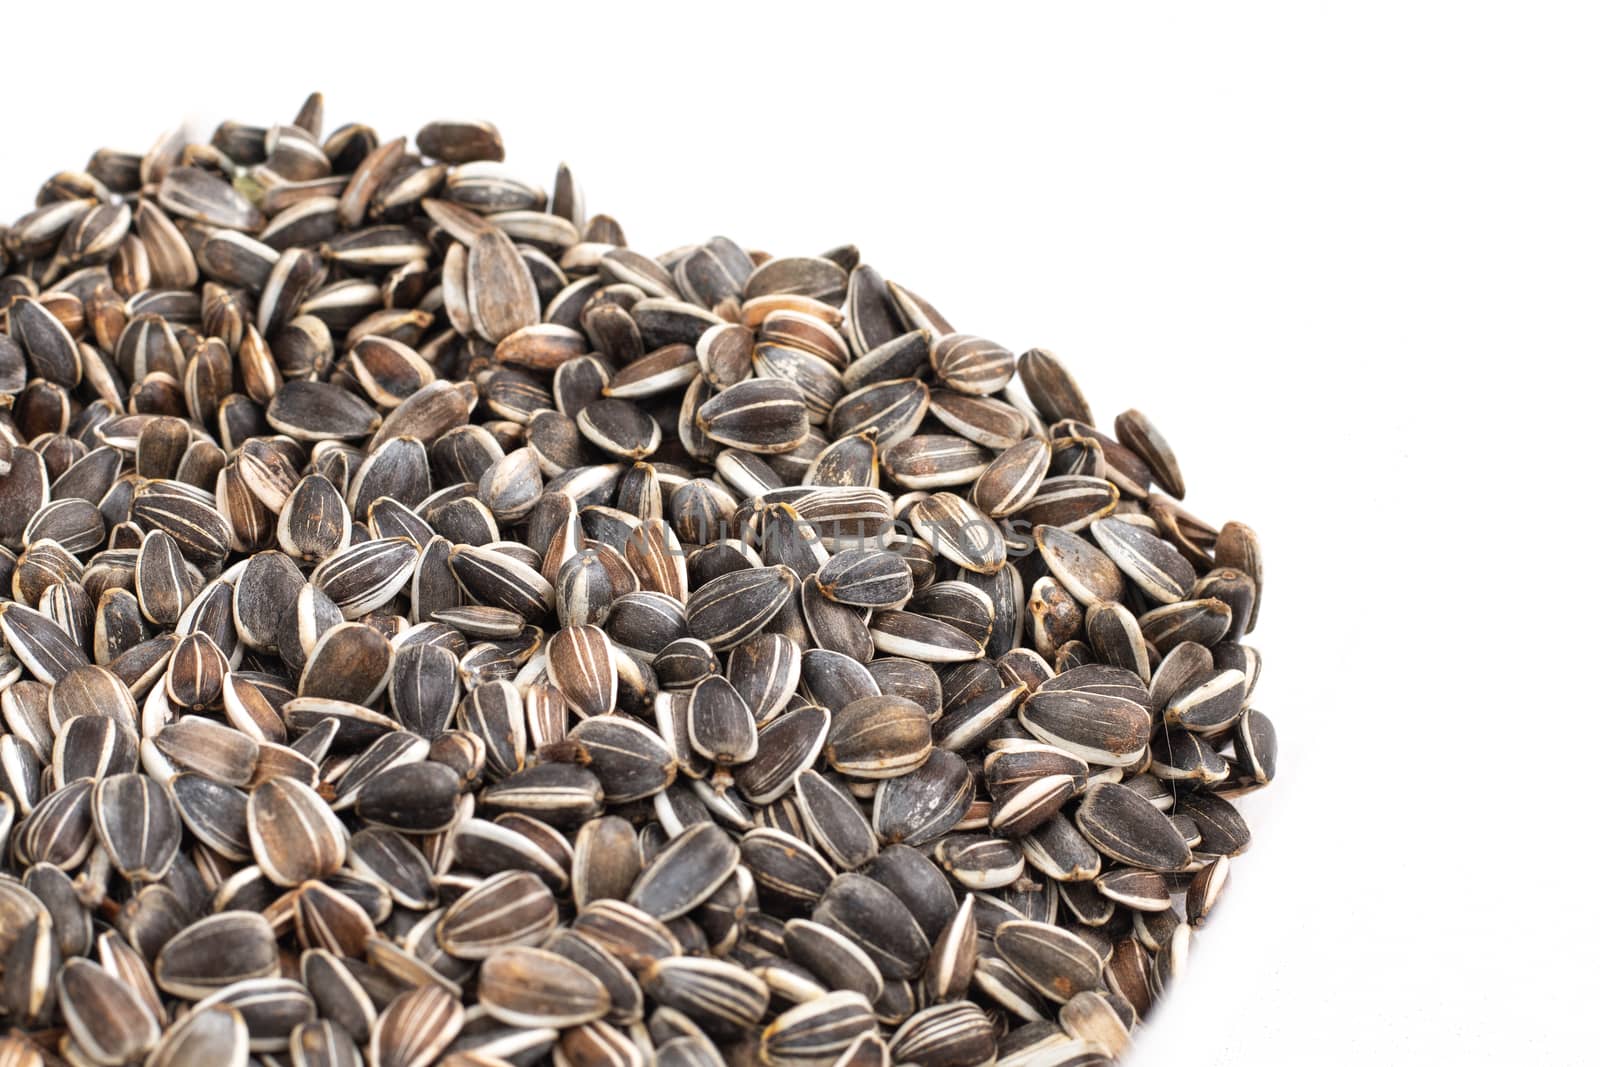 sunflower seed in heap on white background by AtlanticEUROSTOXX